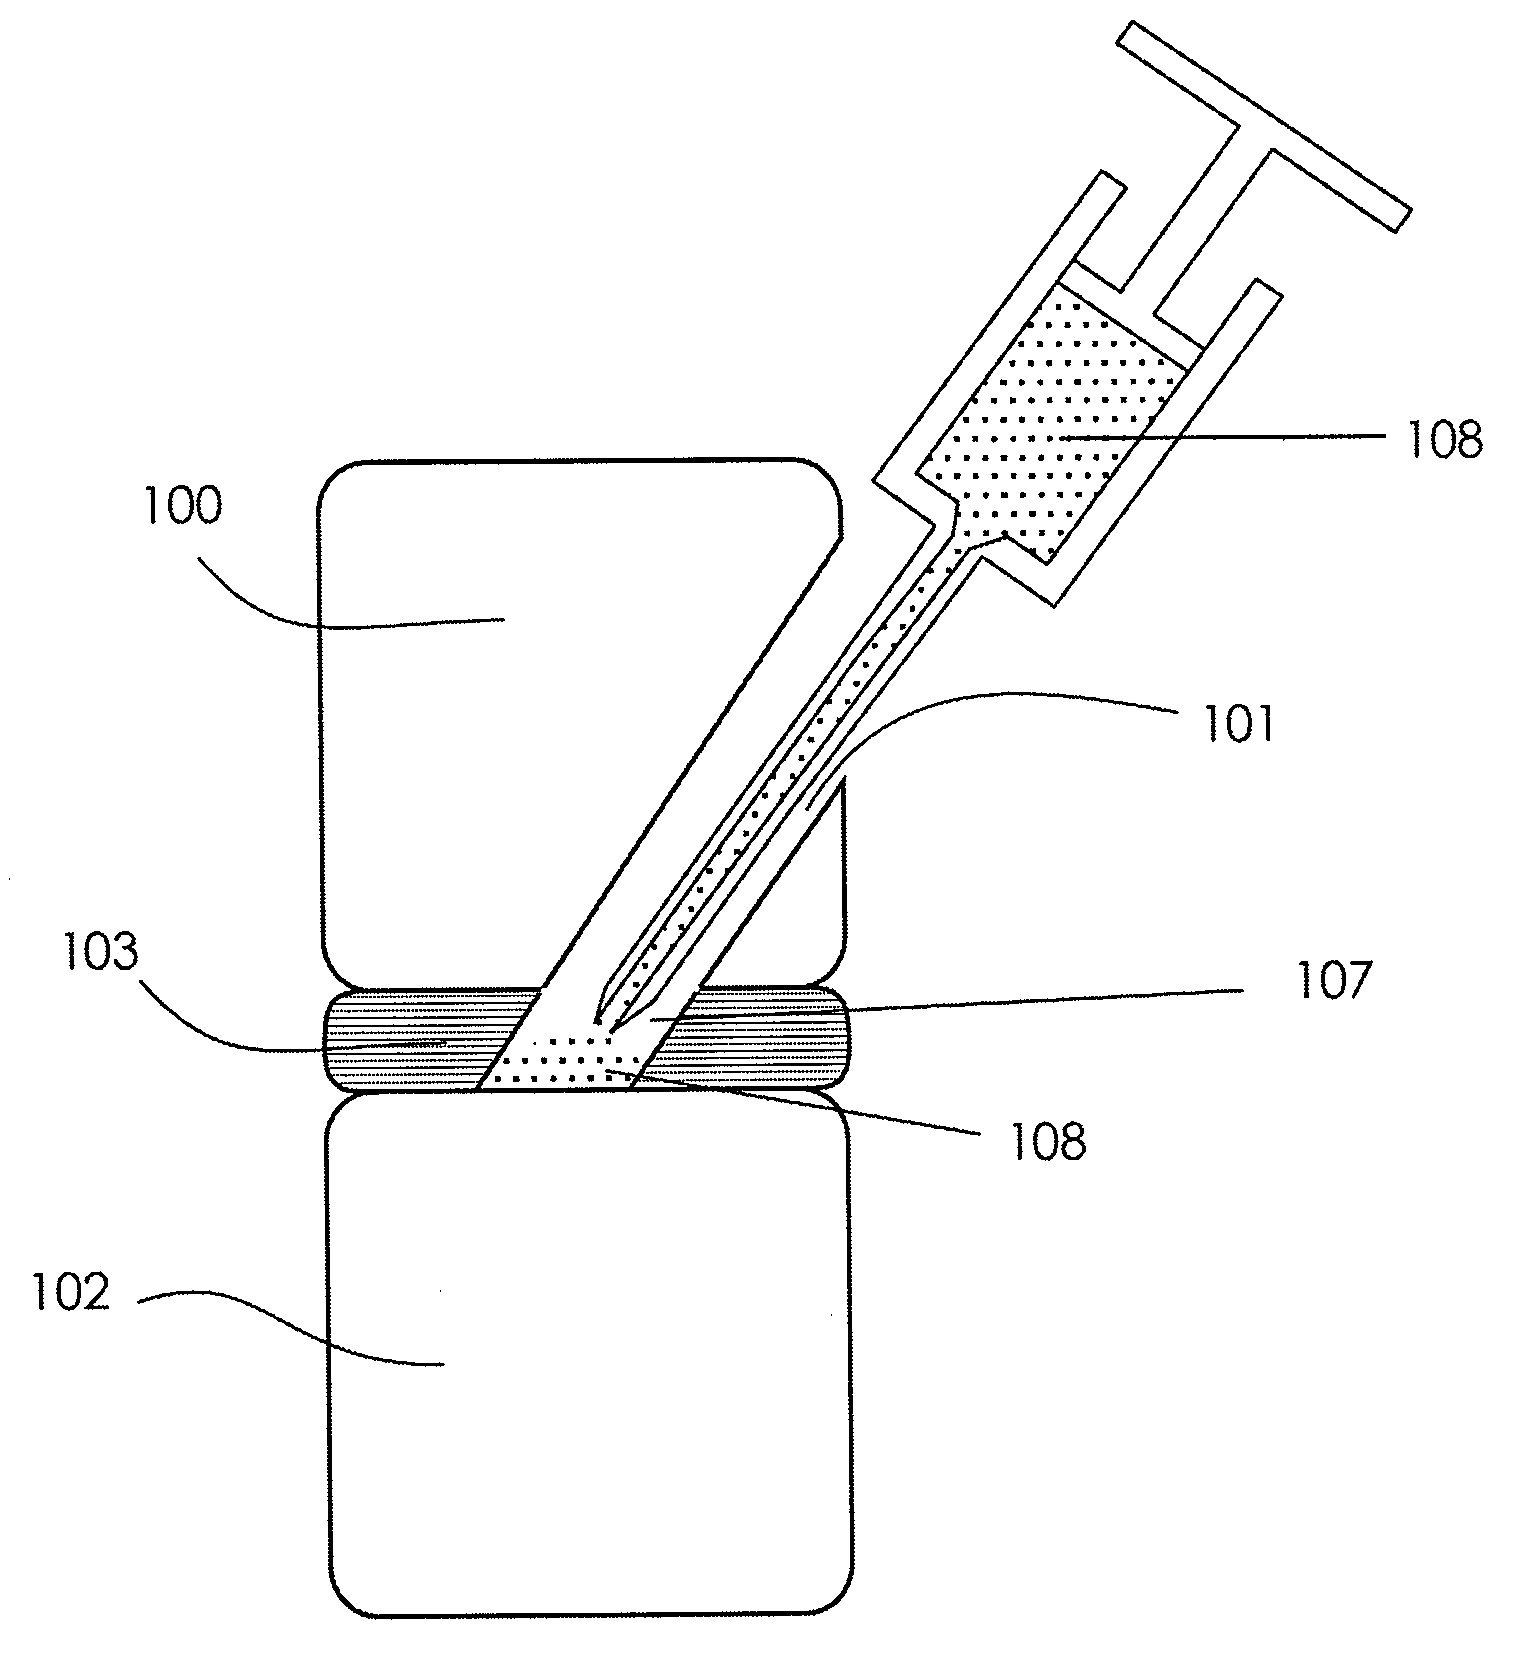 Methods and systems for repairing an intervertebral disc using a transcorporal approach